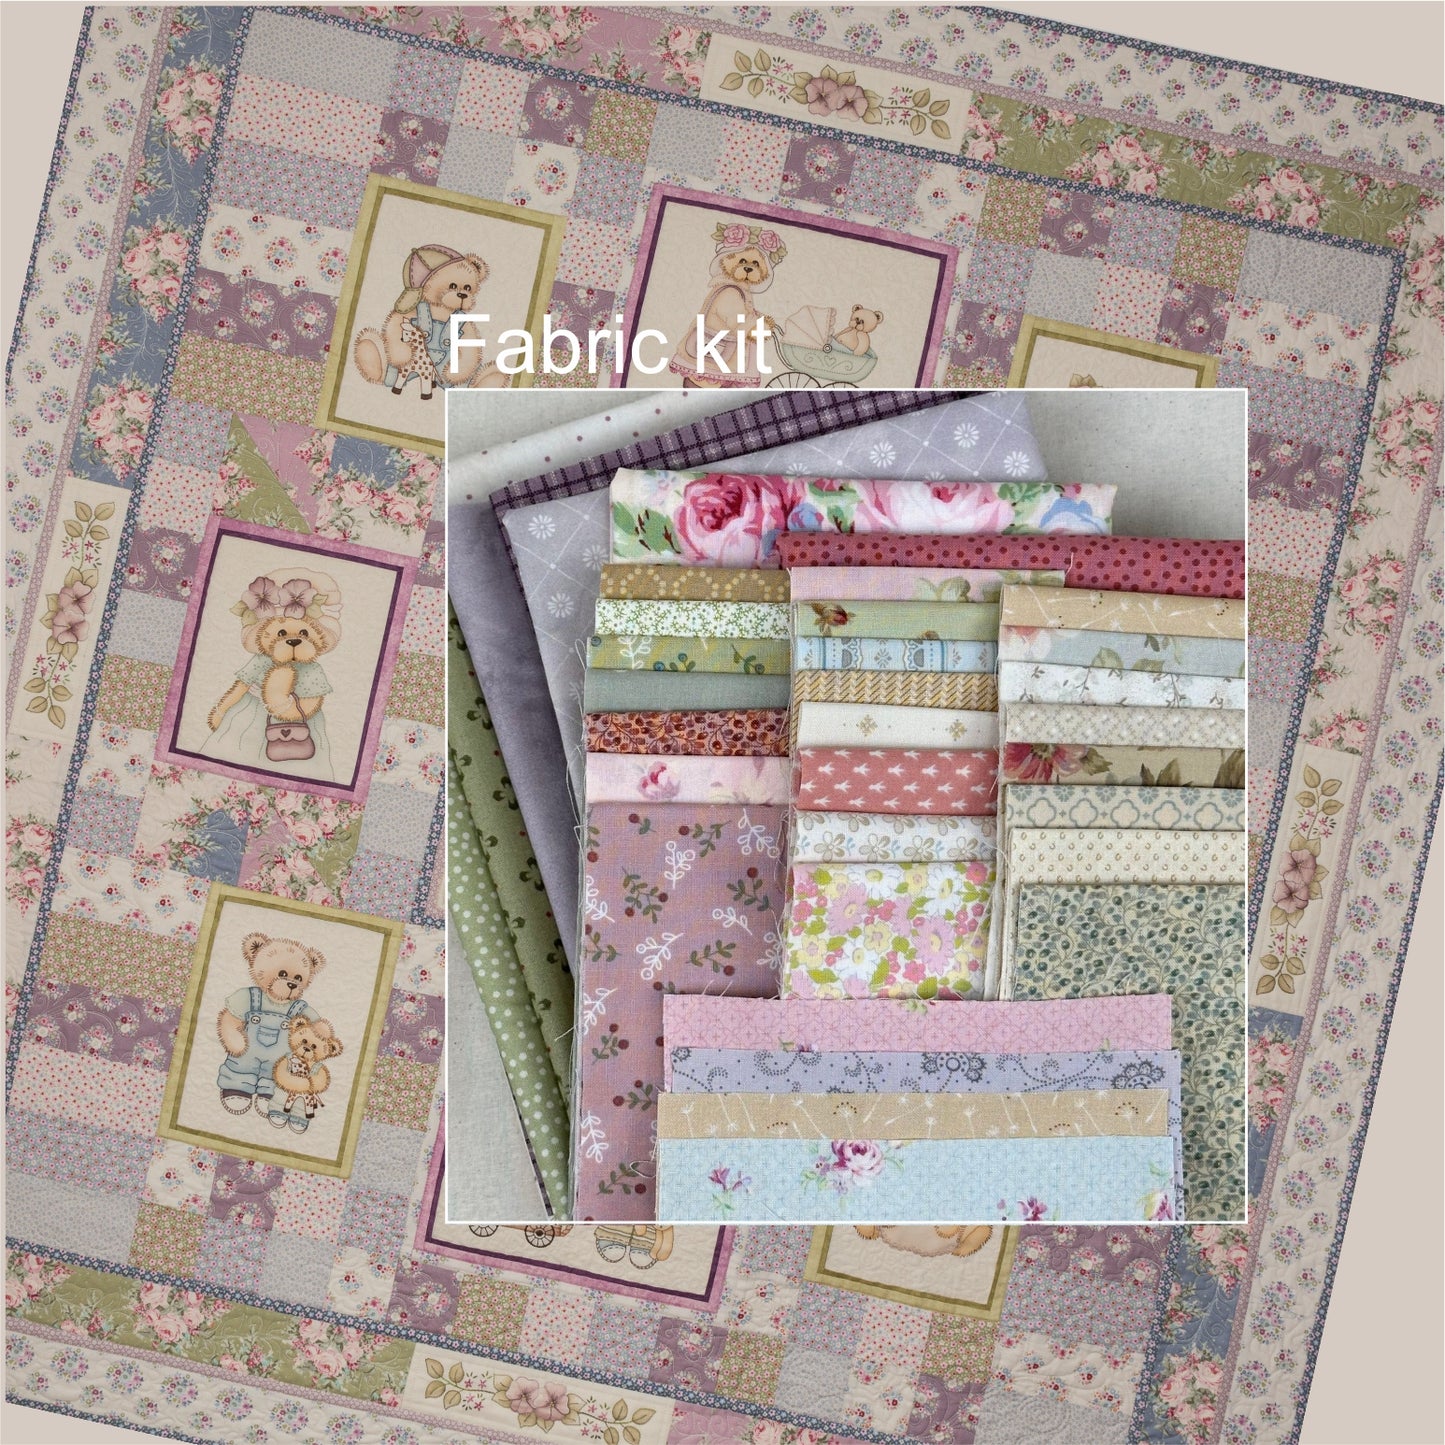 Timeless Teddies set of 11 patterns and fabric kit